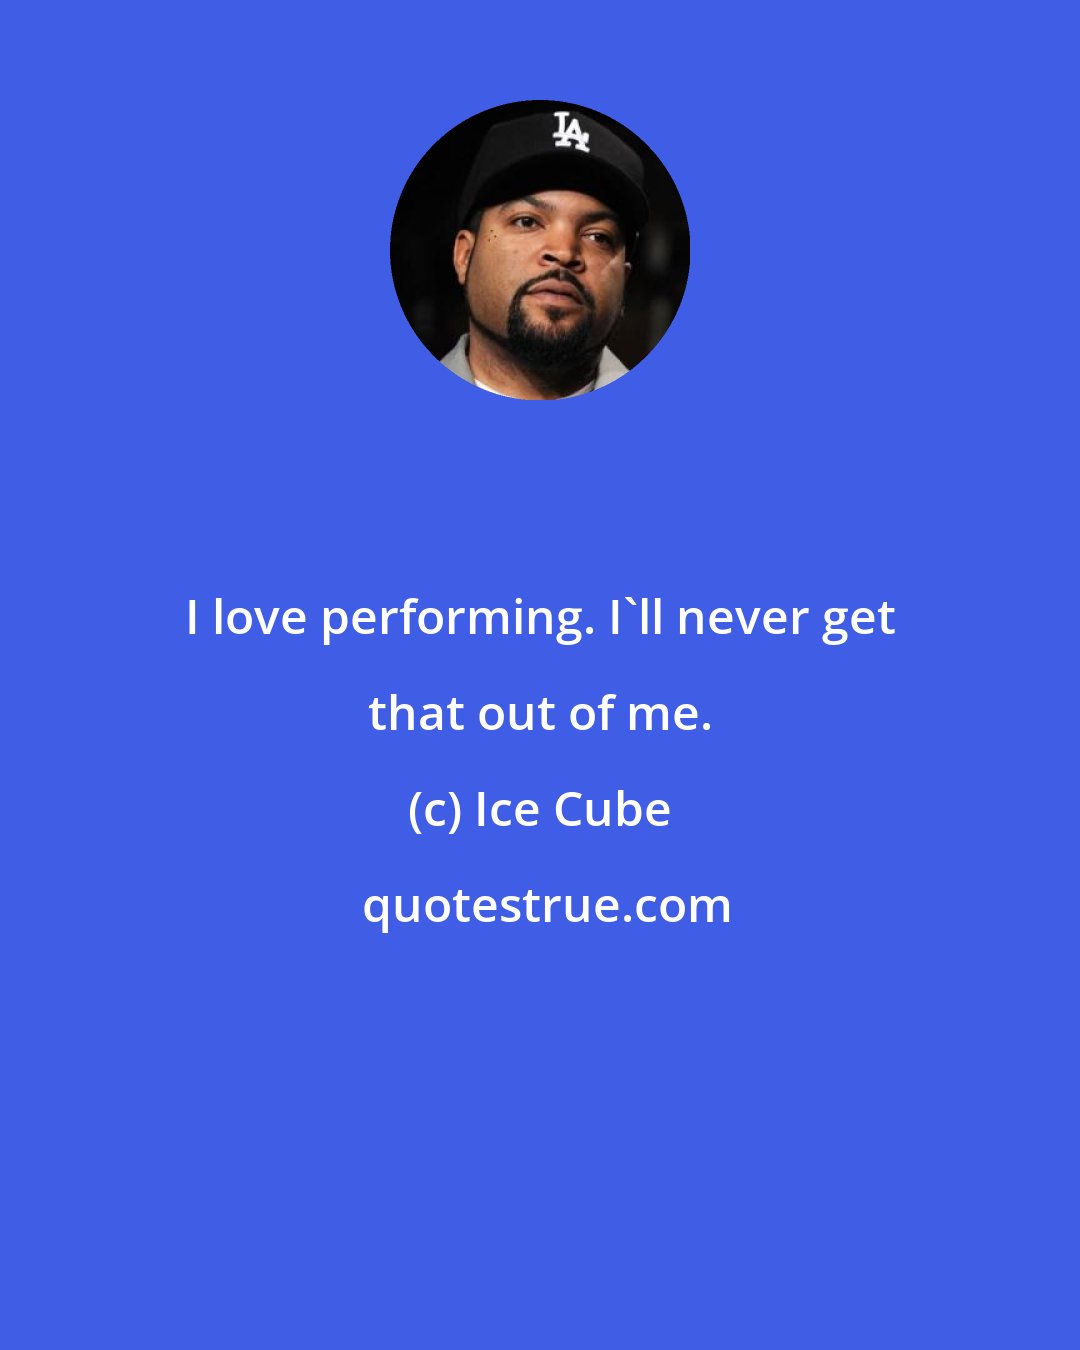 Ice Cube: I love performing. I'll never get that out of me.